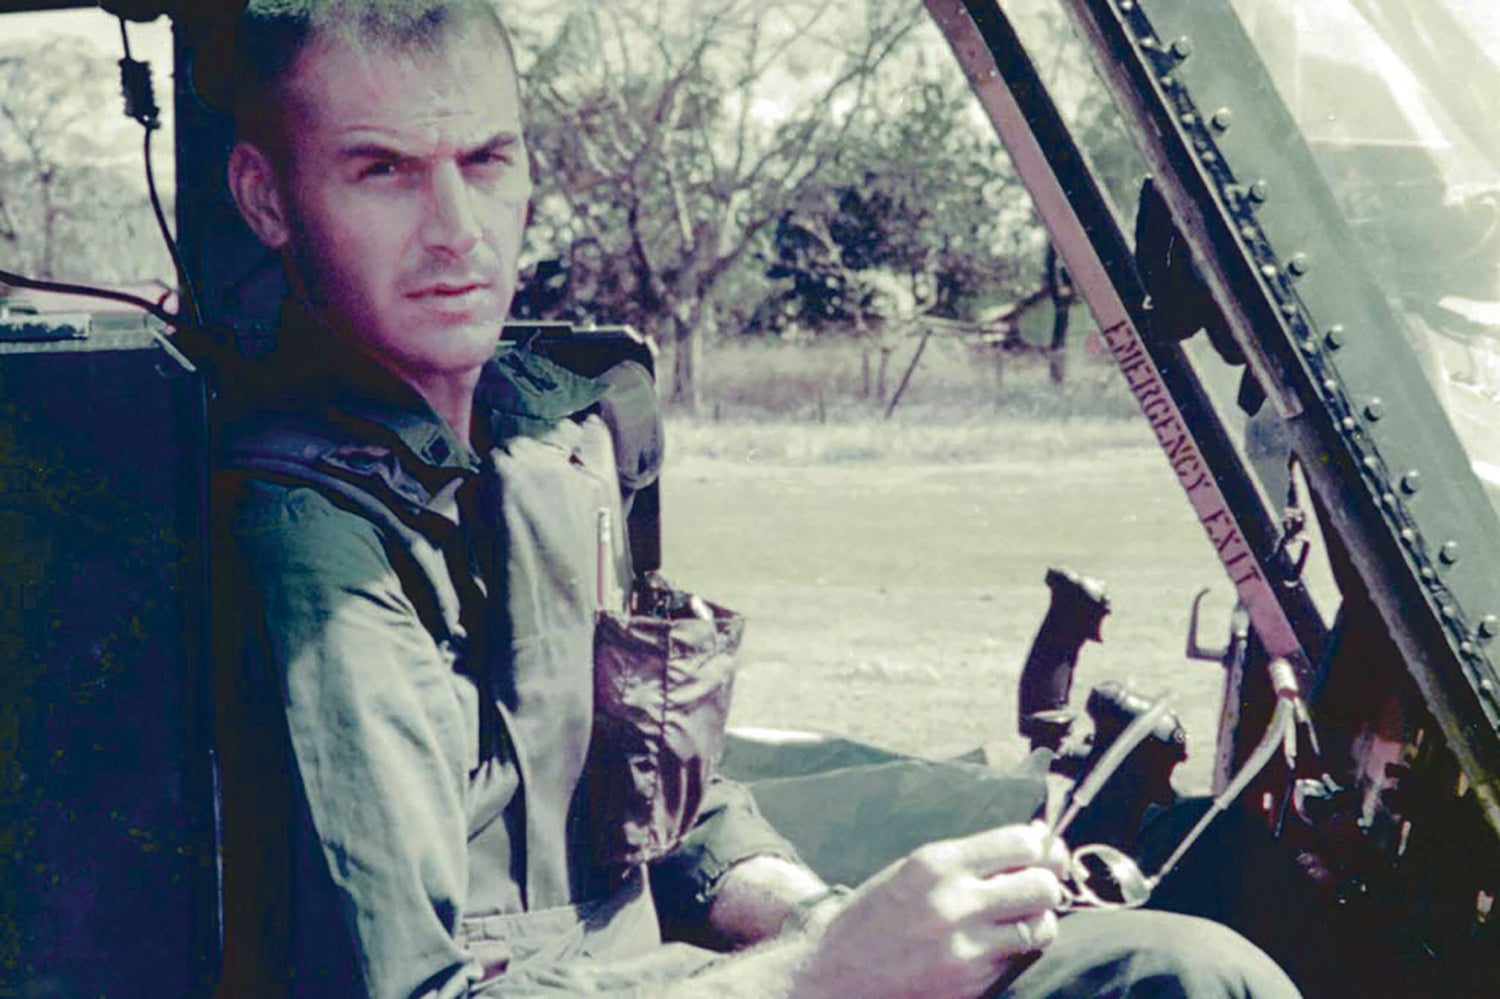 Then-1st Lt. Larry Taylor in a UH-1 ‘Huey’ helicopter in Vietnam. (Credit: Courtesy of Lewis Ray)